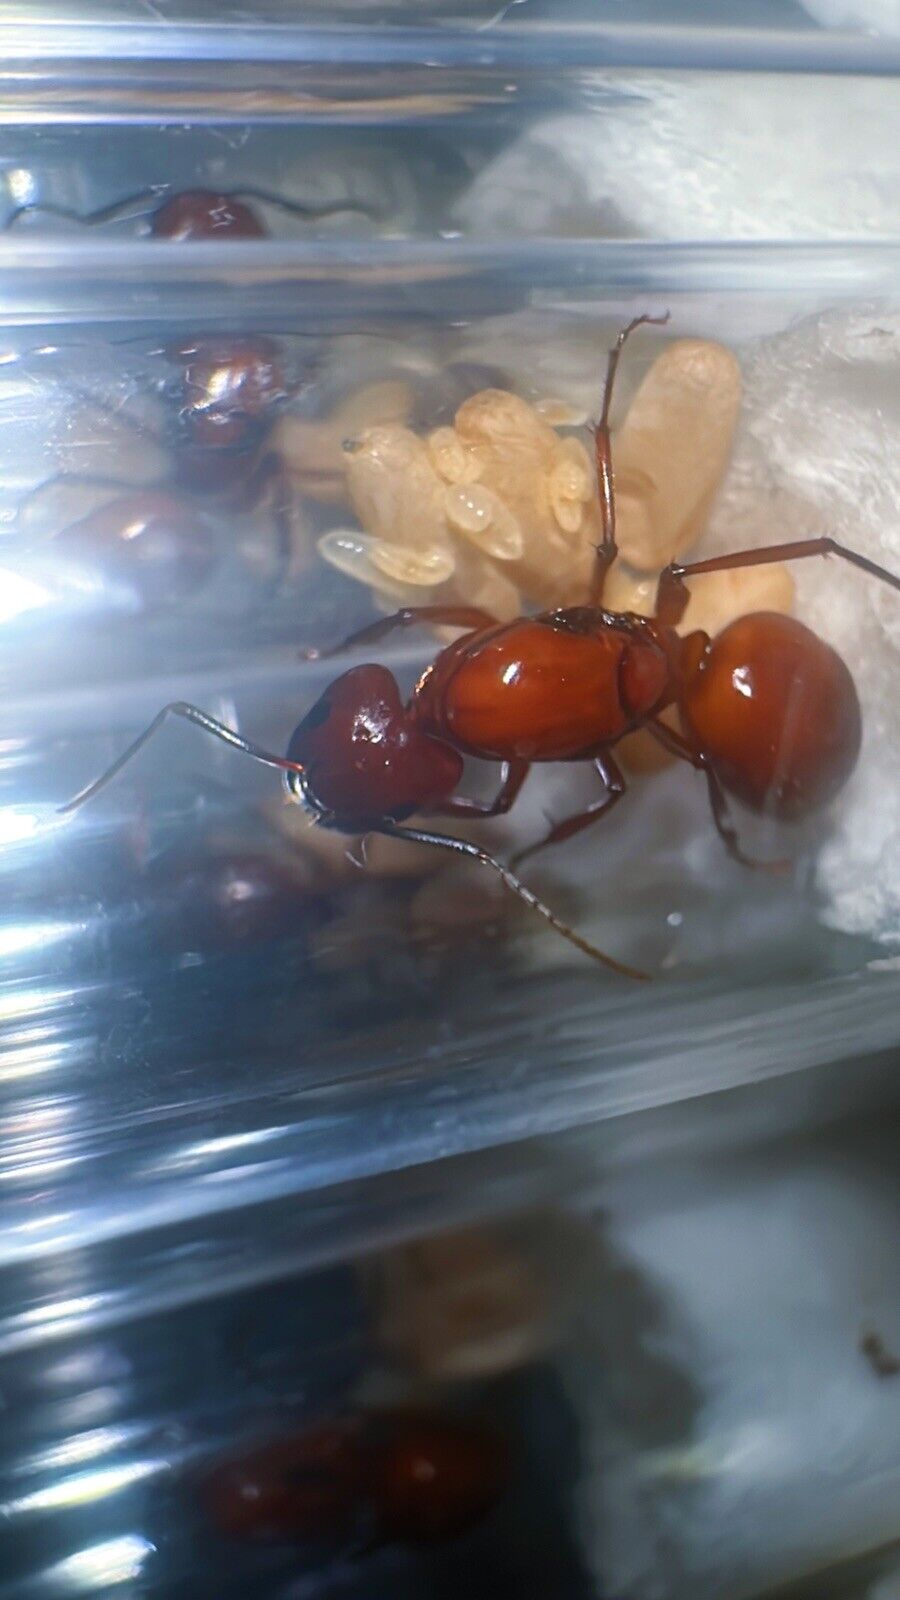 Queen Ant- Camponotus castaneus queen w/ pupae - Feeder insect